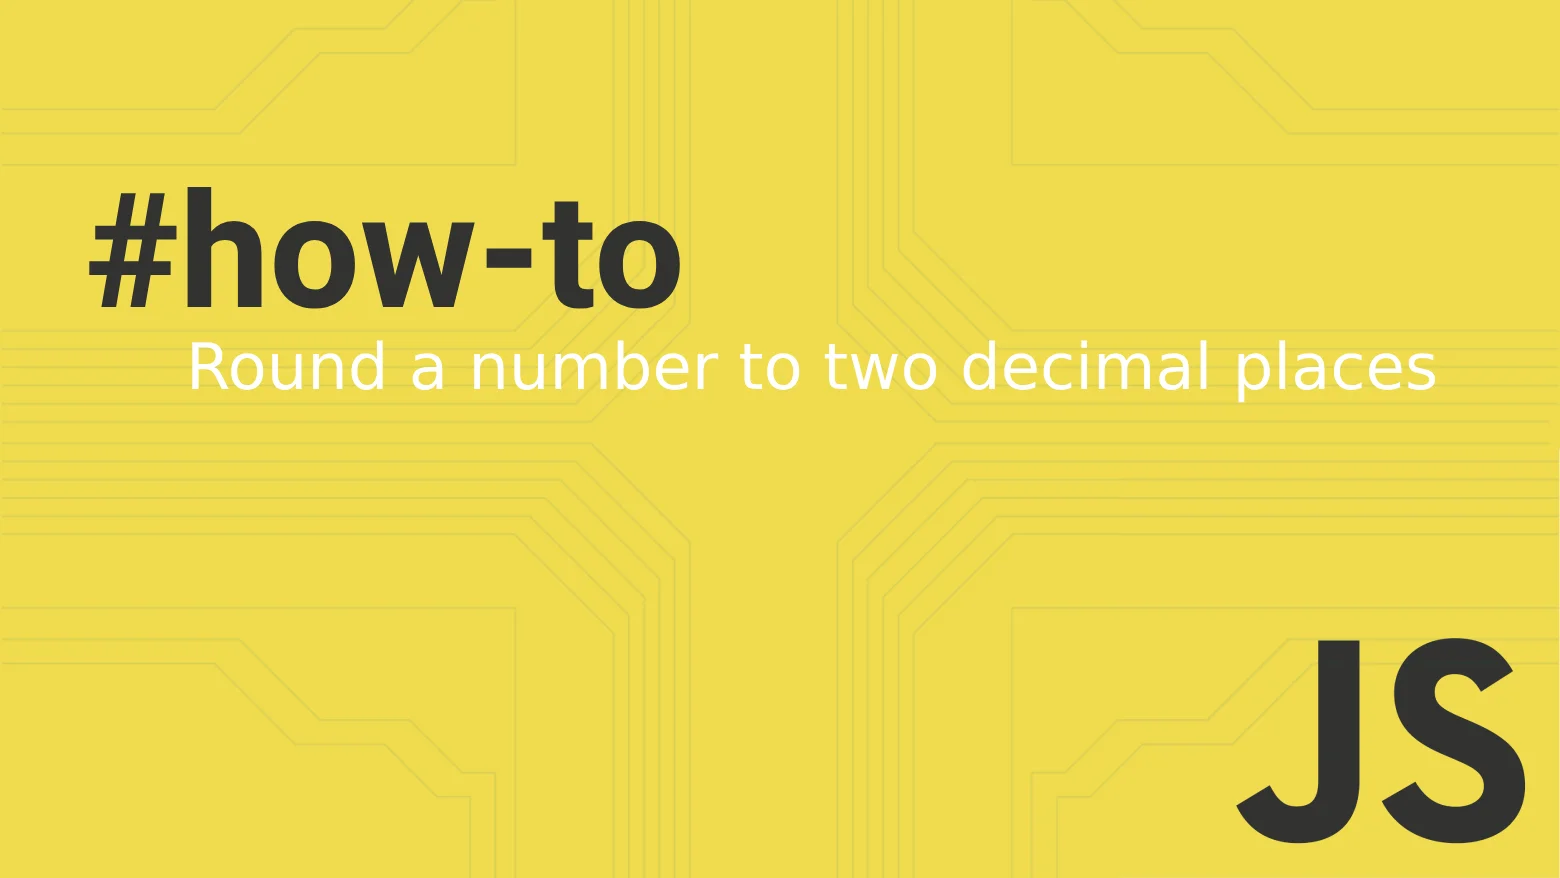 How to round a number to two decimal places in JavaScript